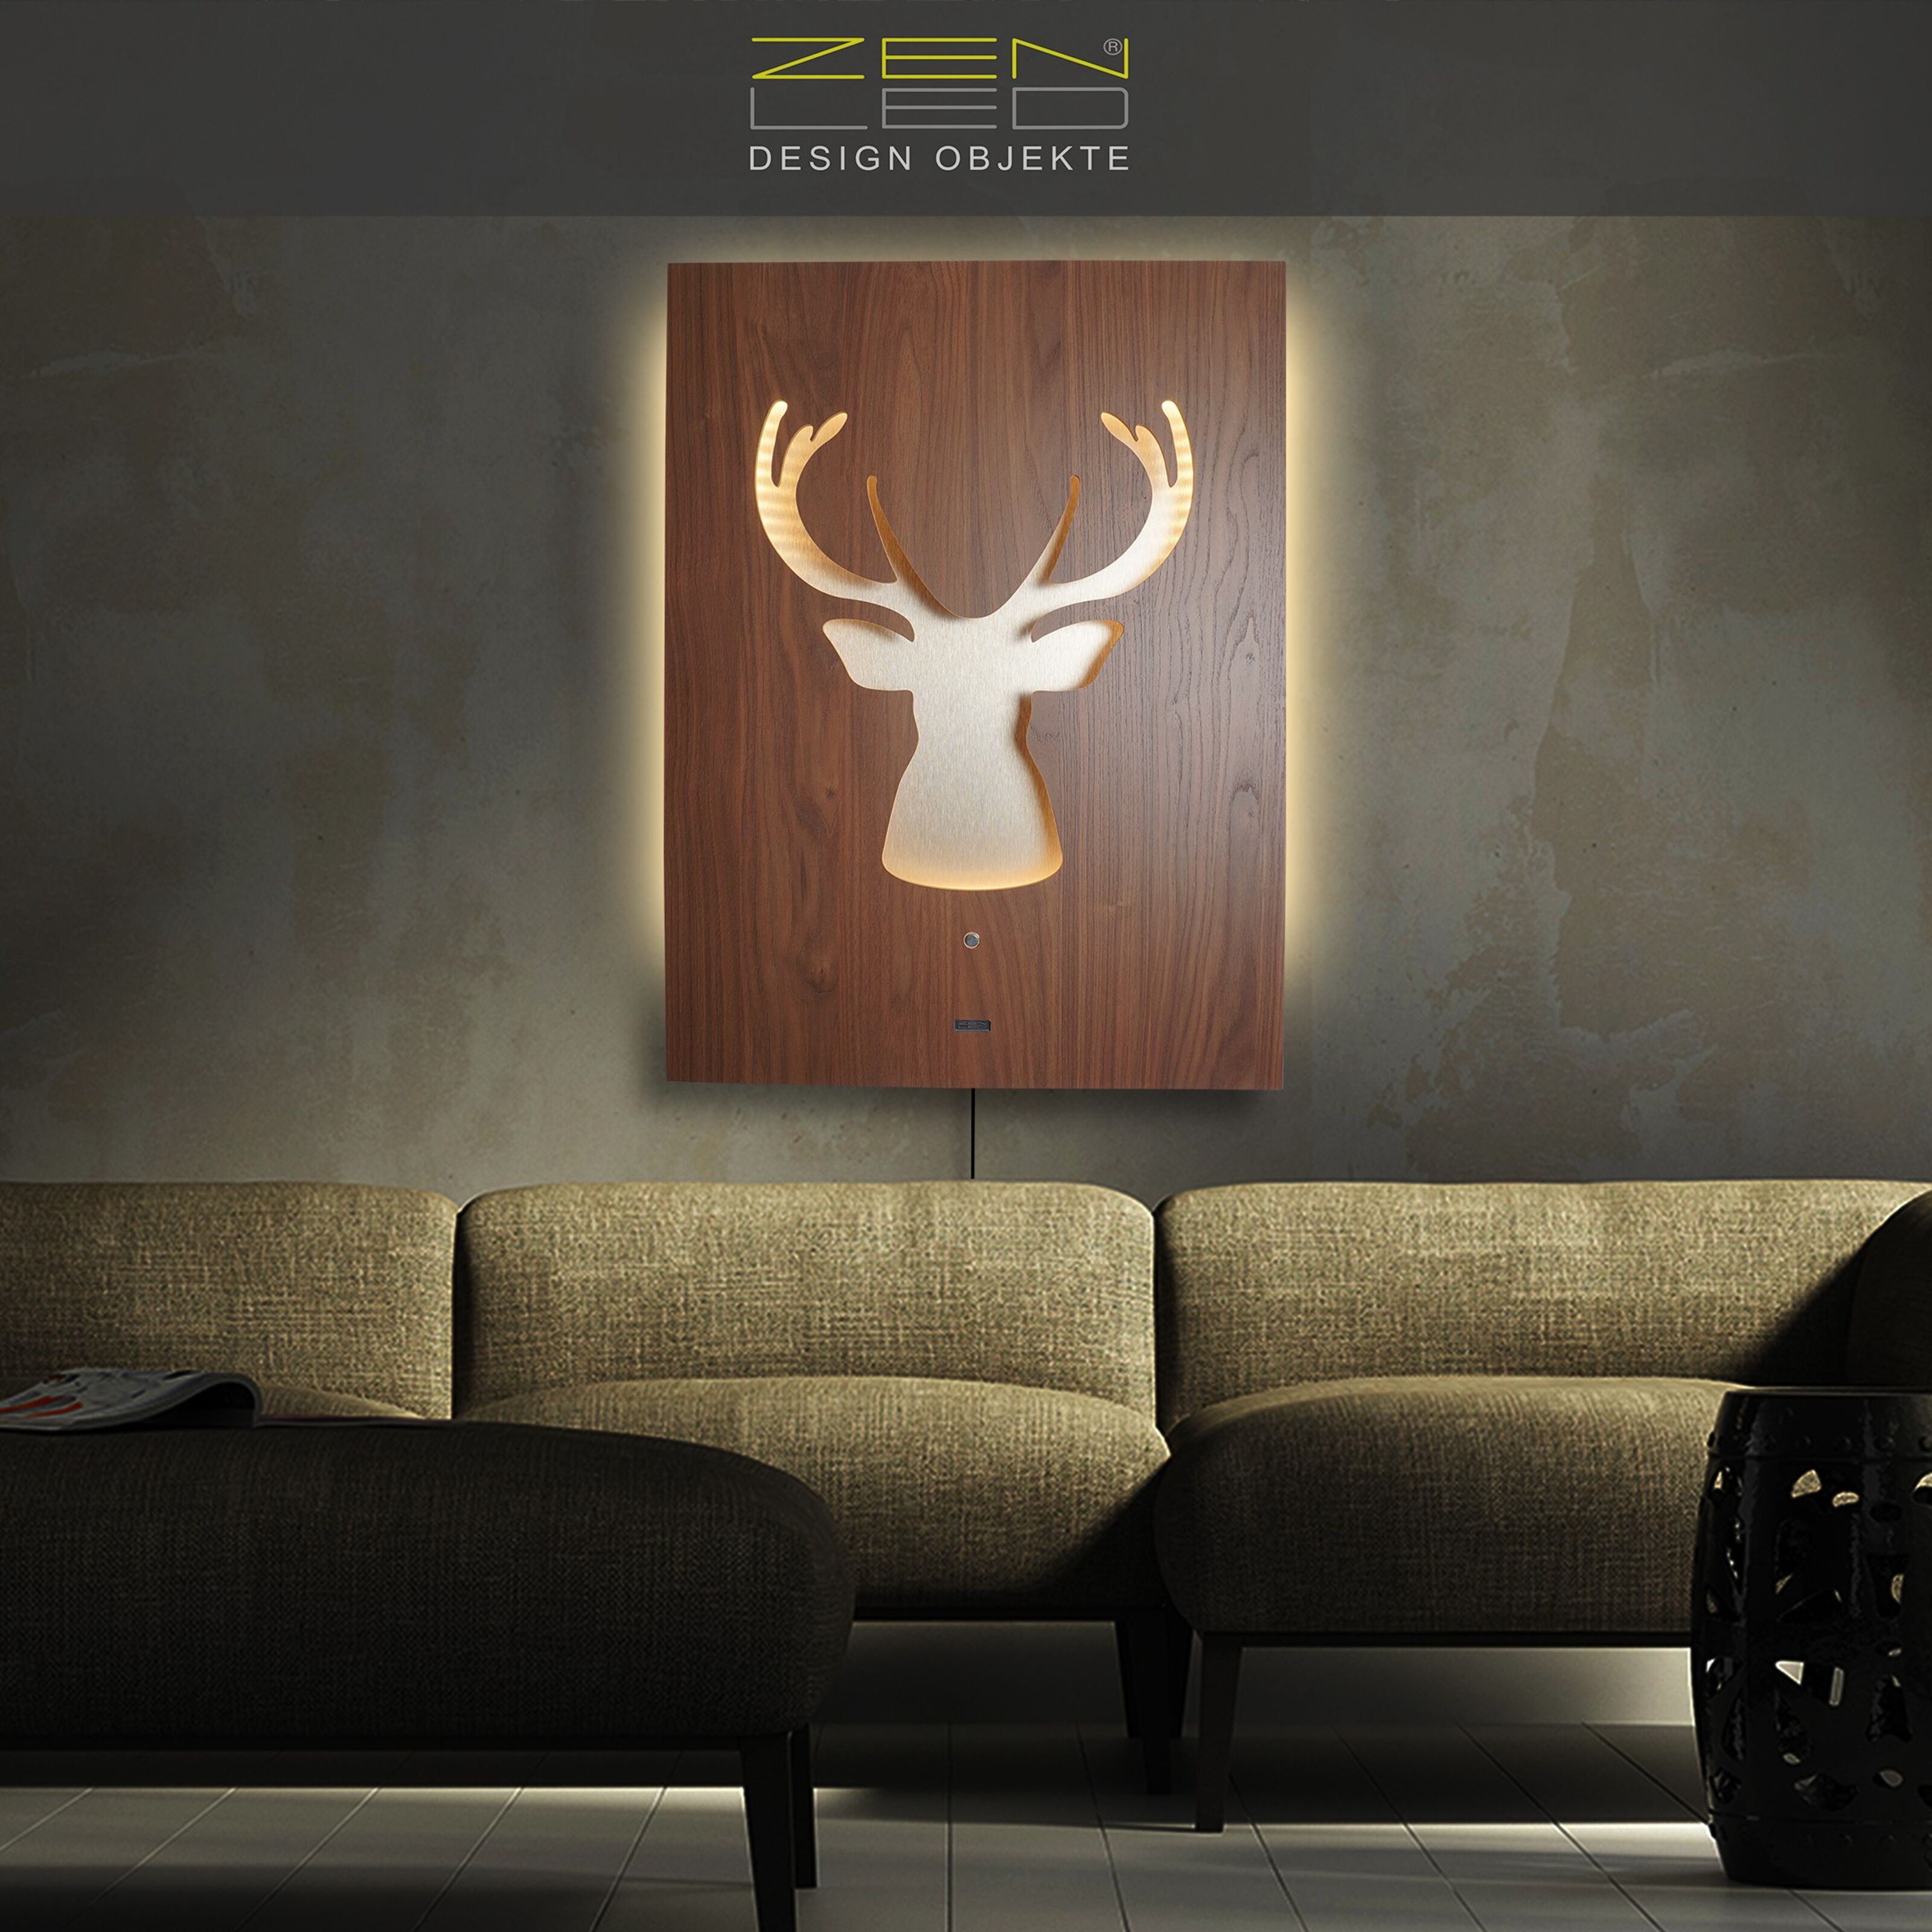 wood 3D on wood in aluminum illuminated 60x80cm, champagne, walnut-brown wall LED plate deer illuminated decoration wholesale rustic metal model sculpture, \